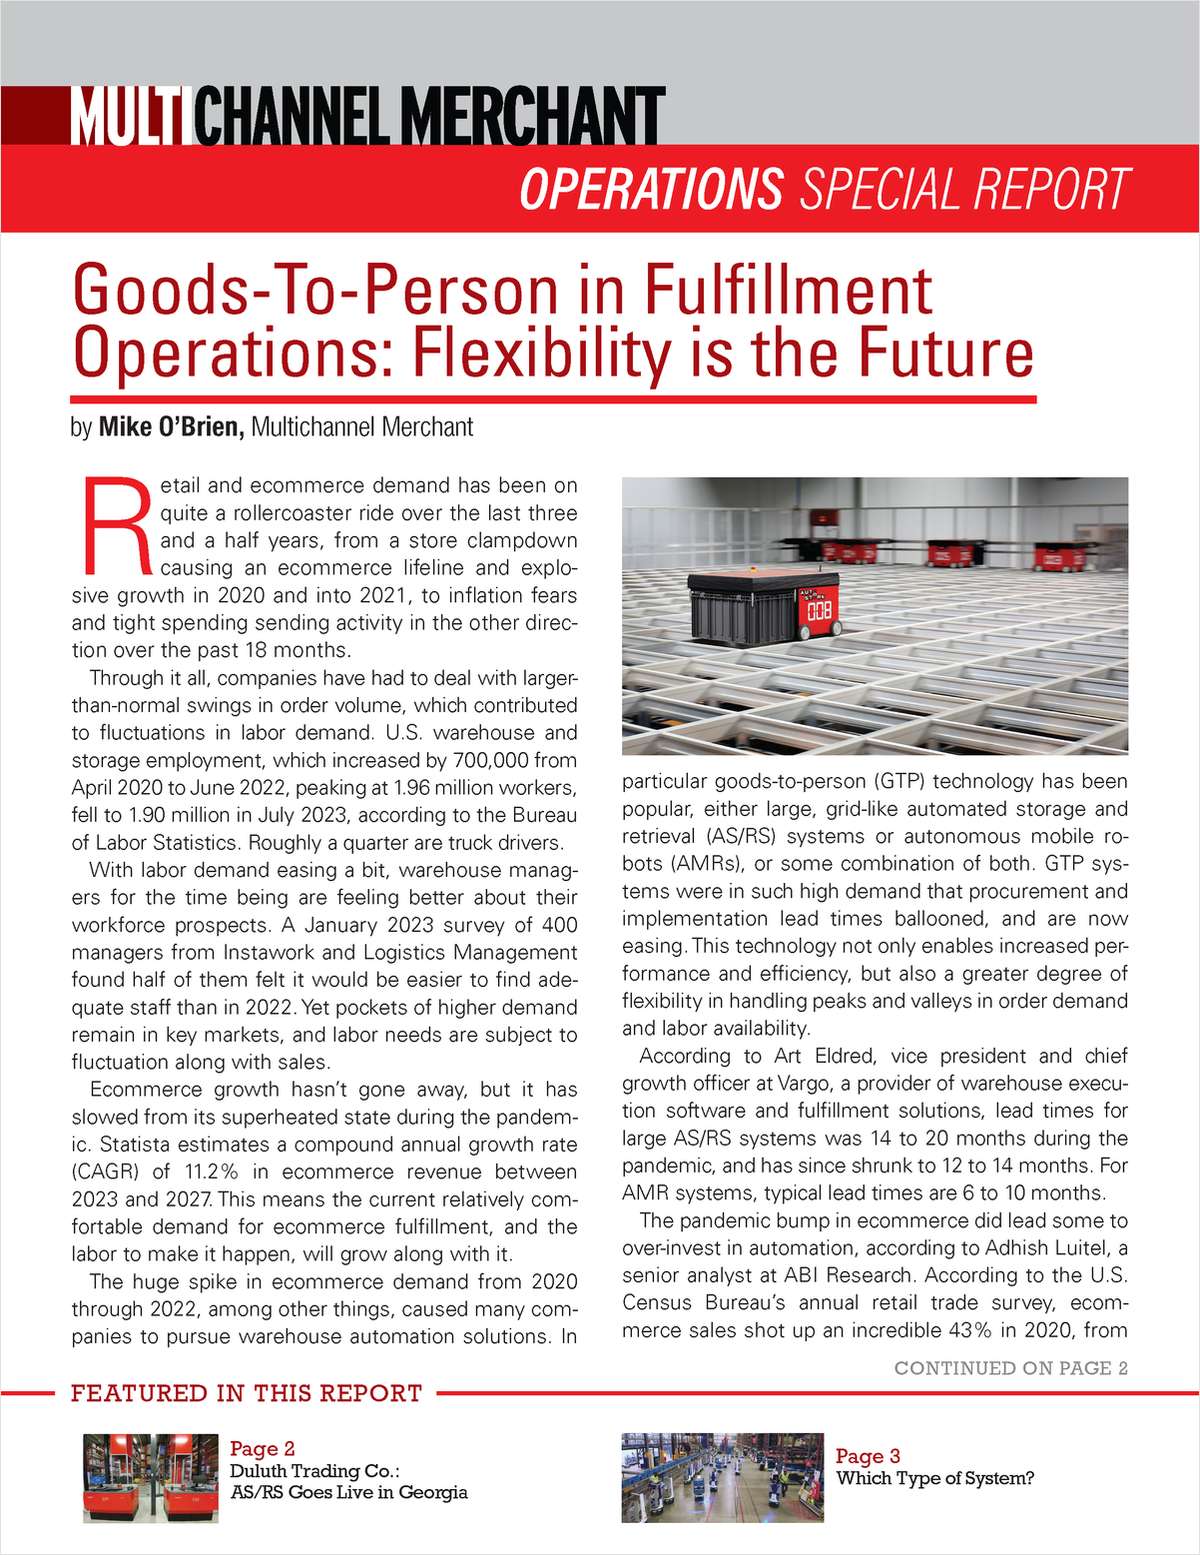 Goods-To-Person E-Fulfillment Technology: Flexing Along With Demand